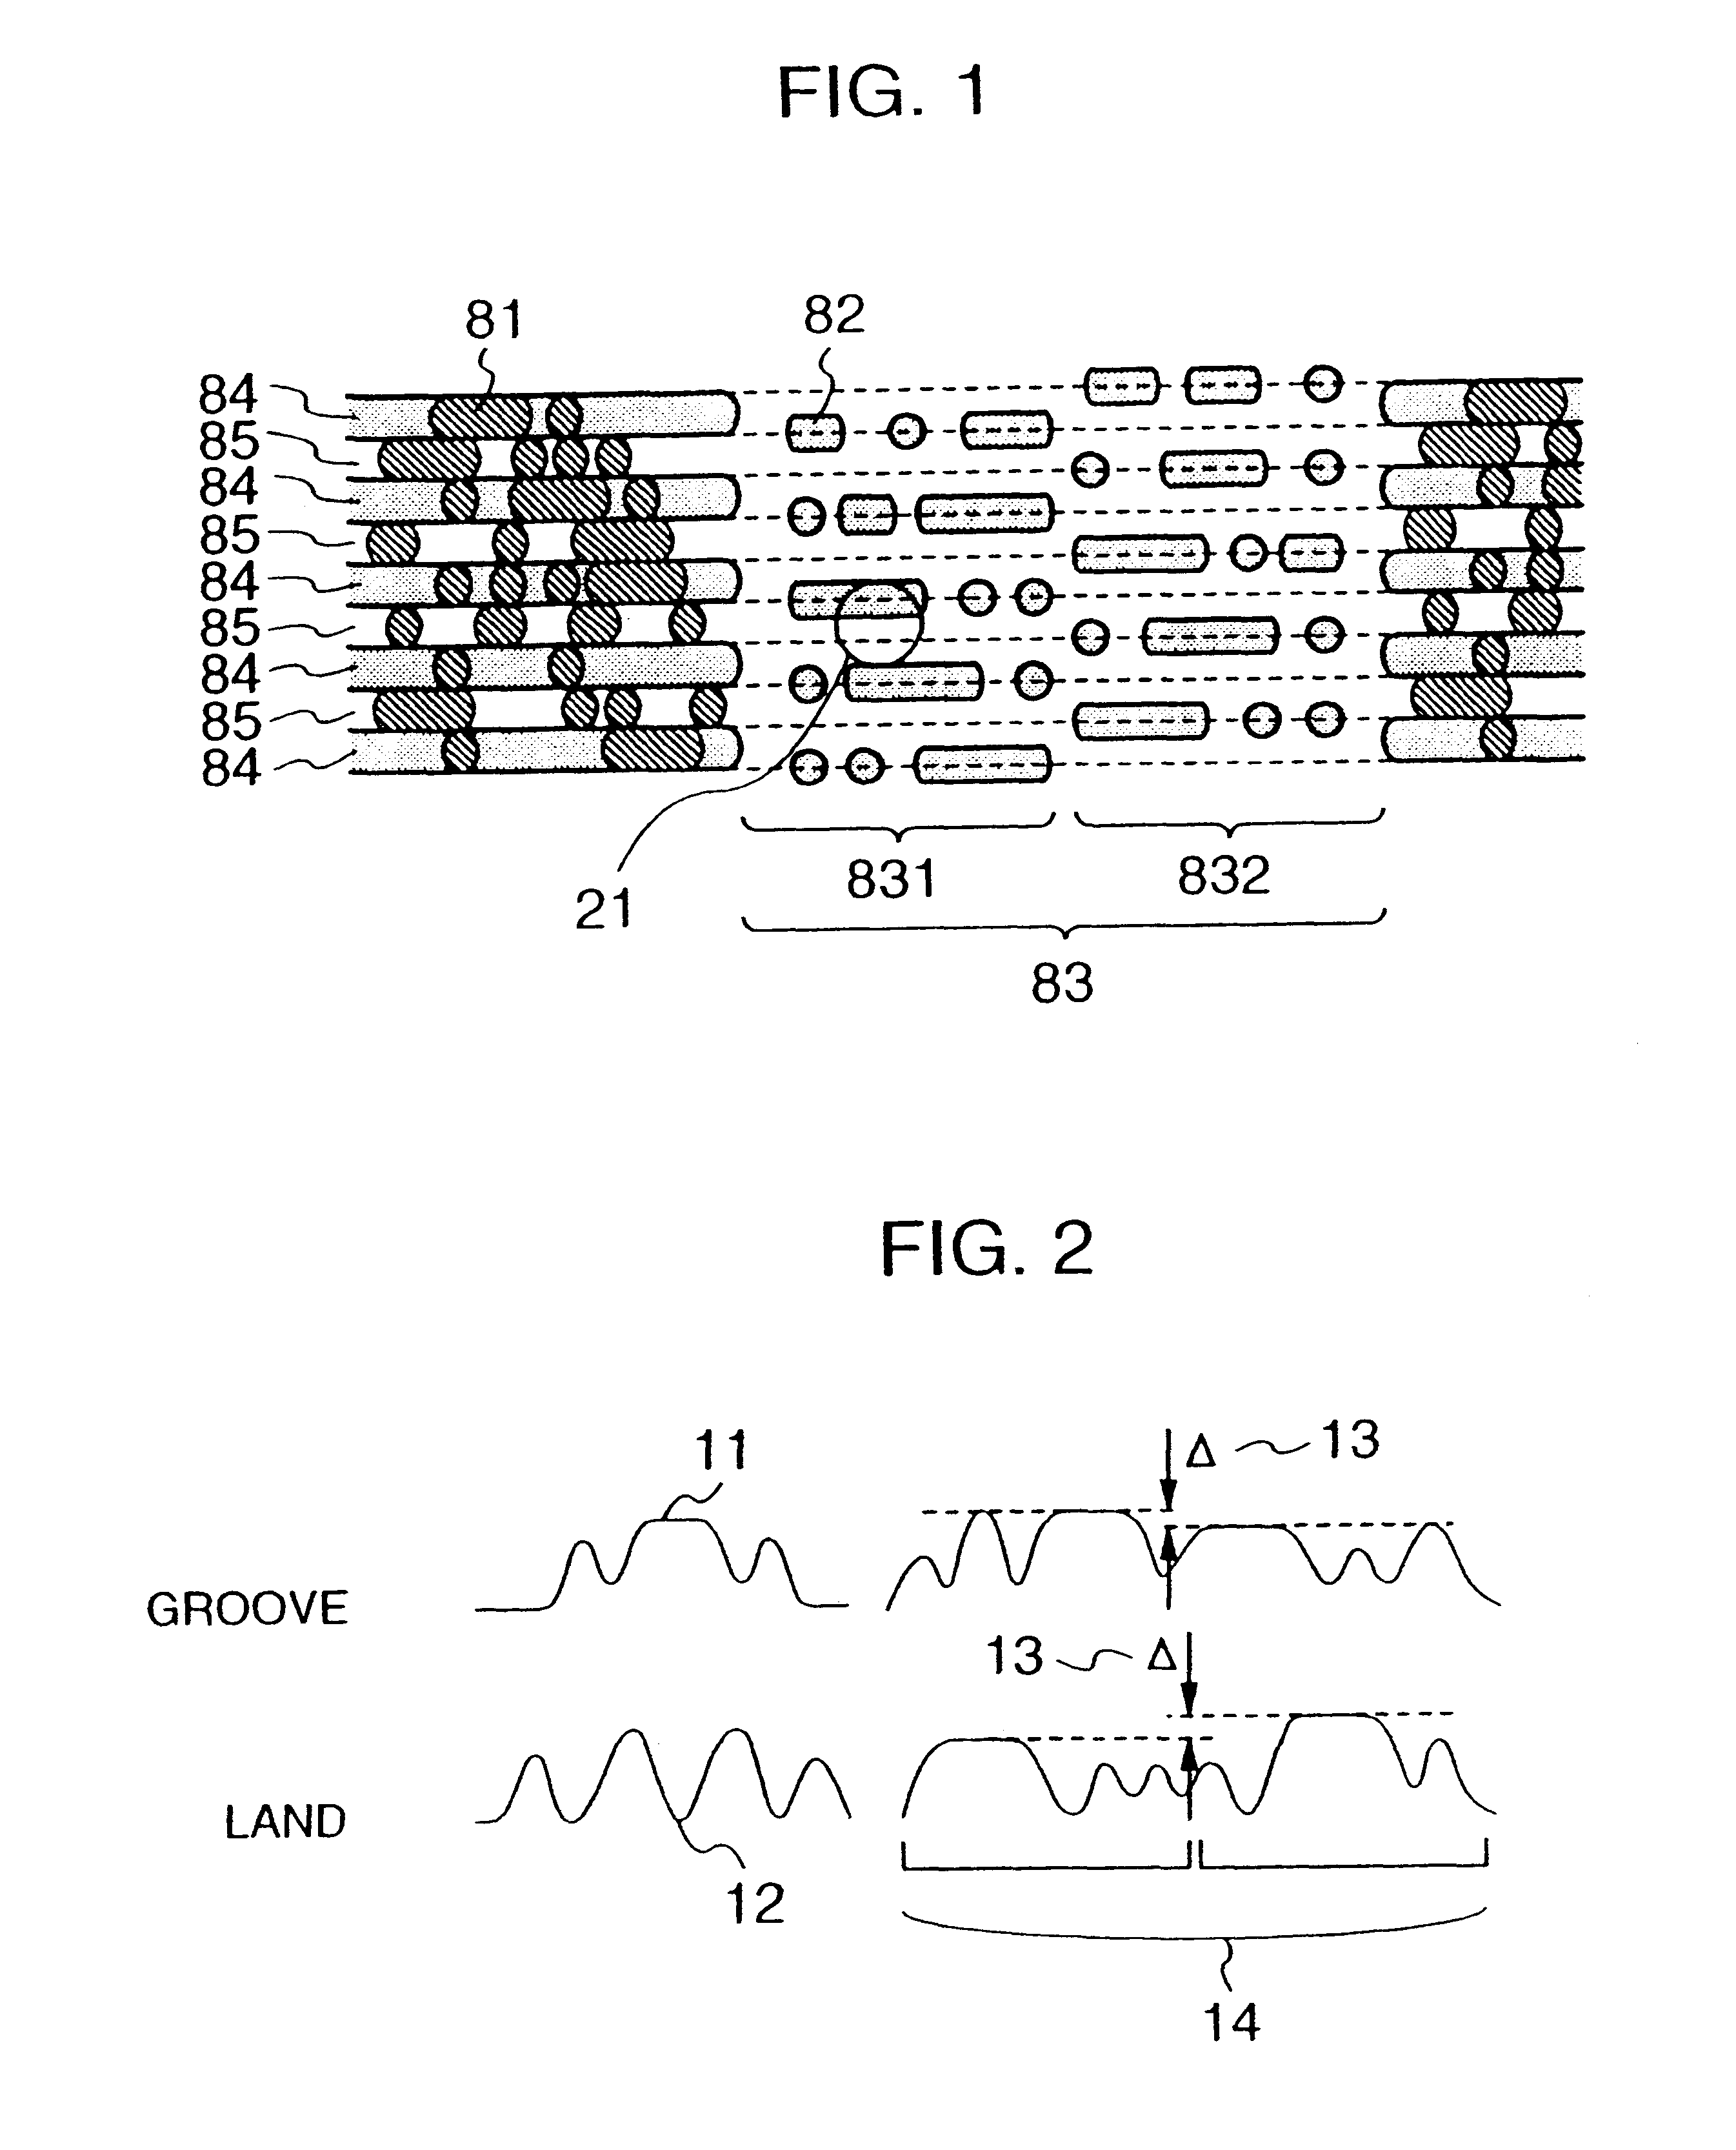 Optical reproducing method for optical medium with aligned prepit portion